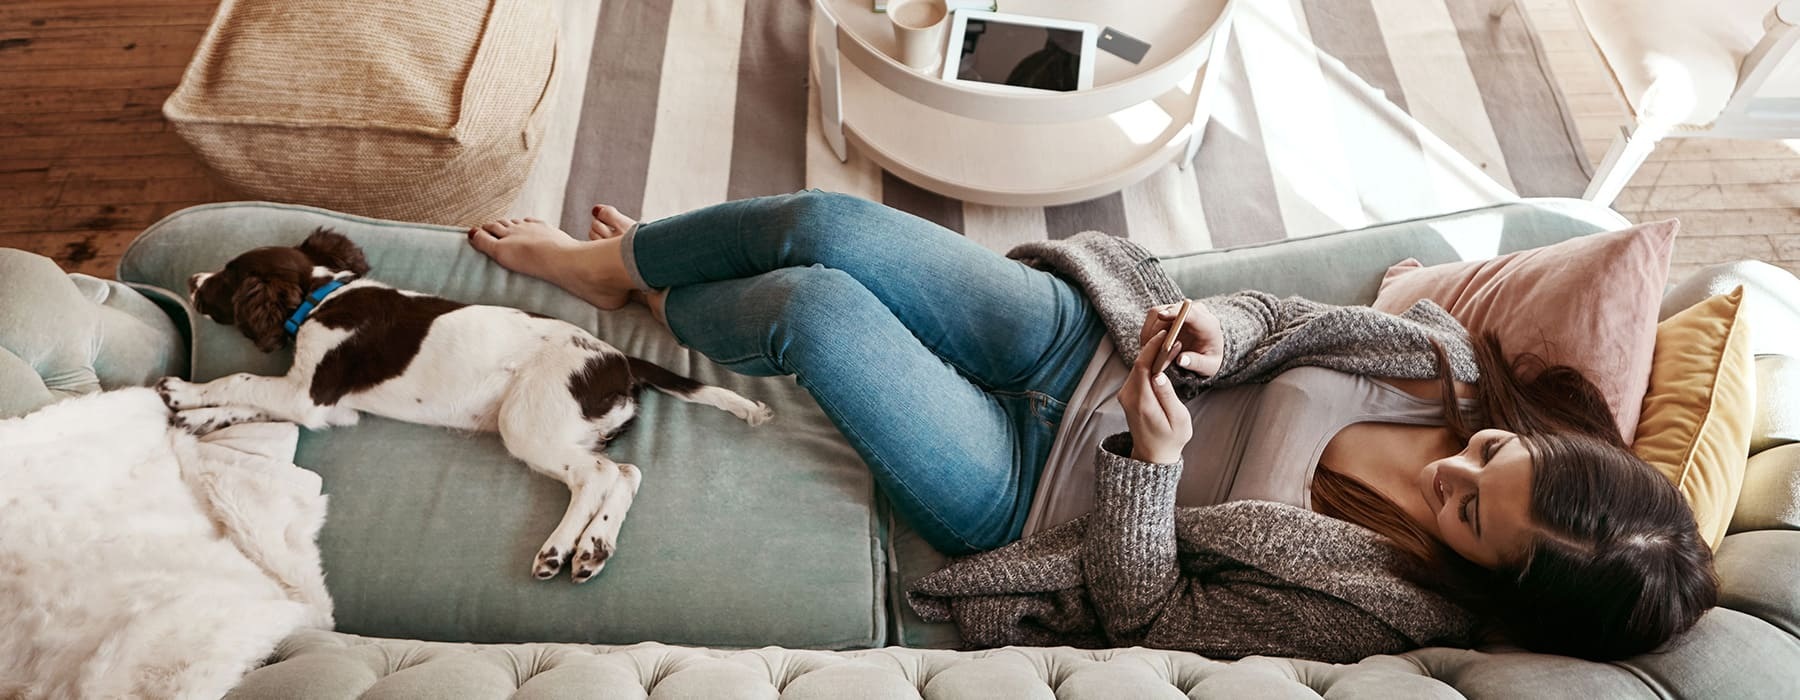 lifestyle image of a woman laying beside a pet in a living room